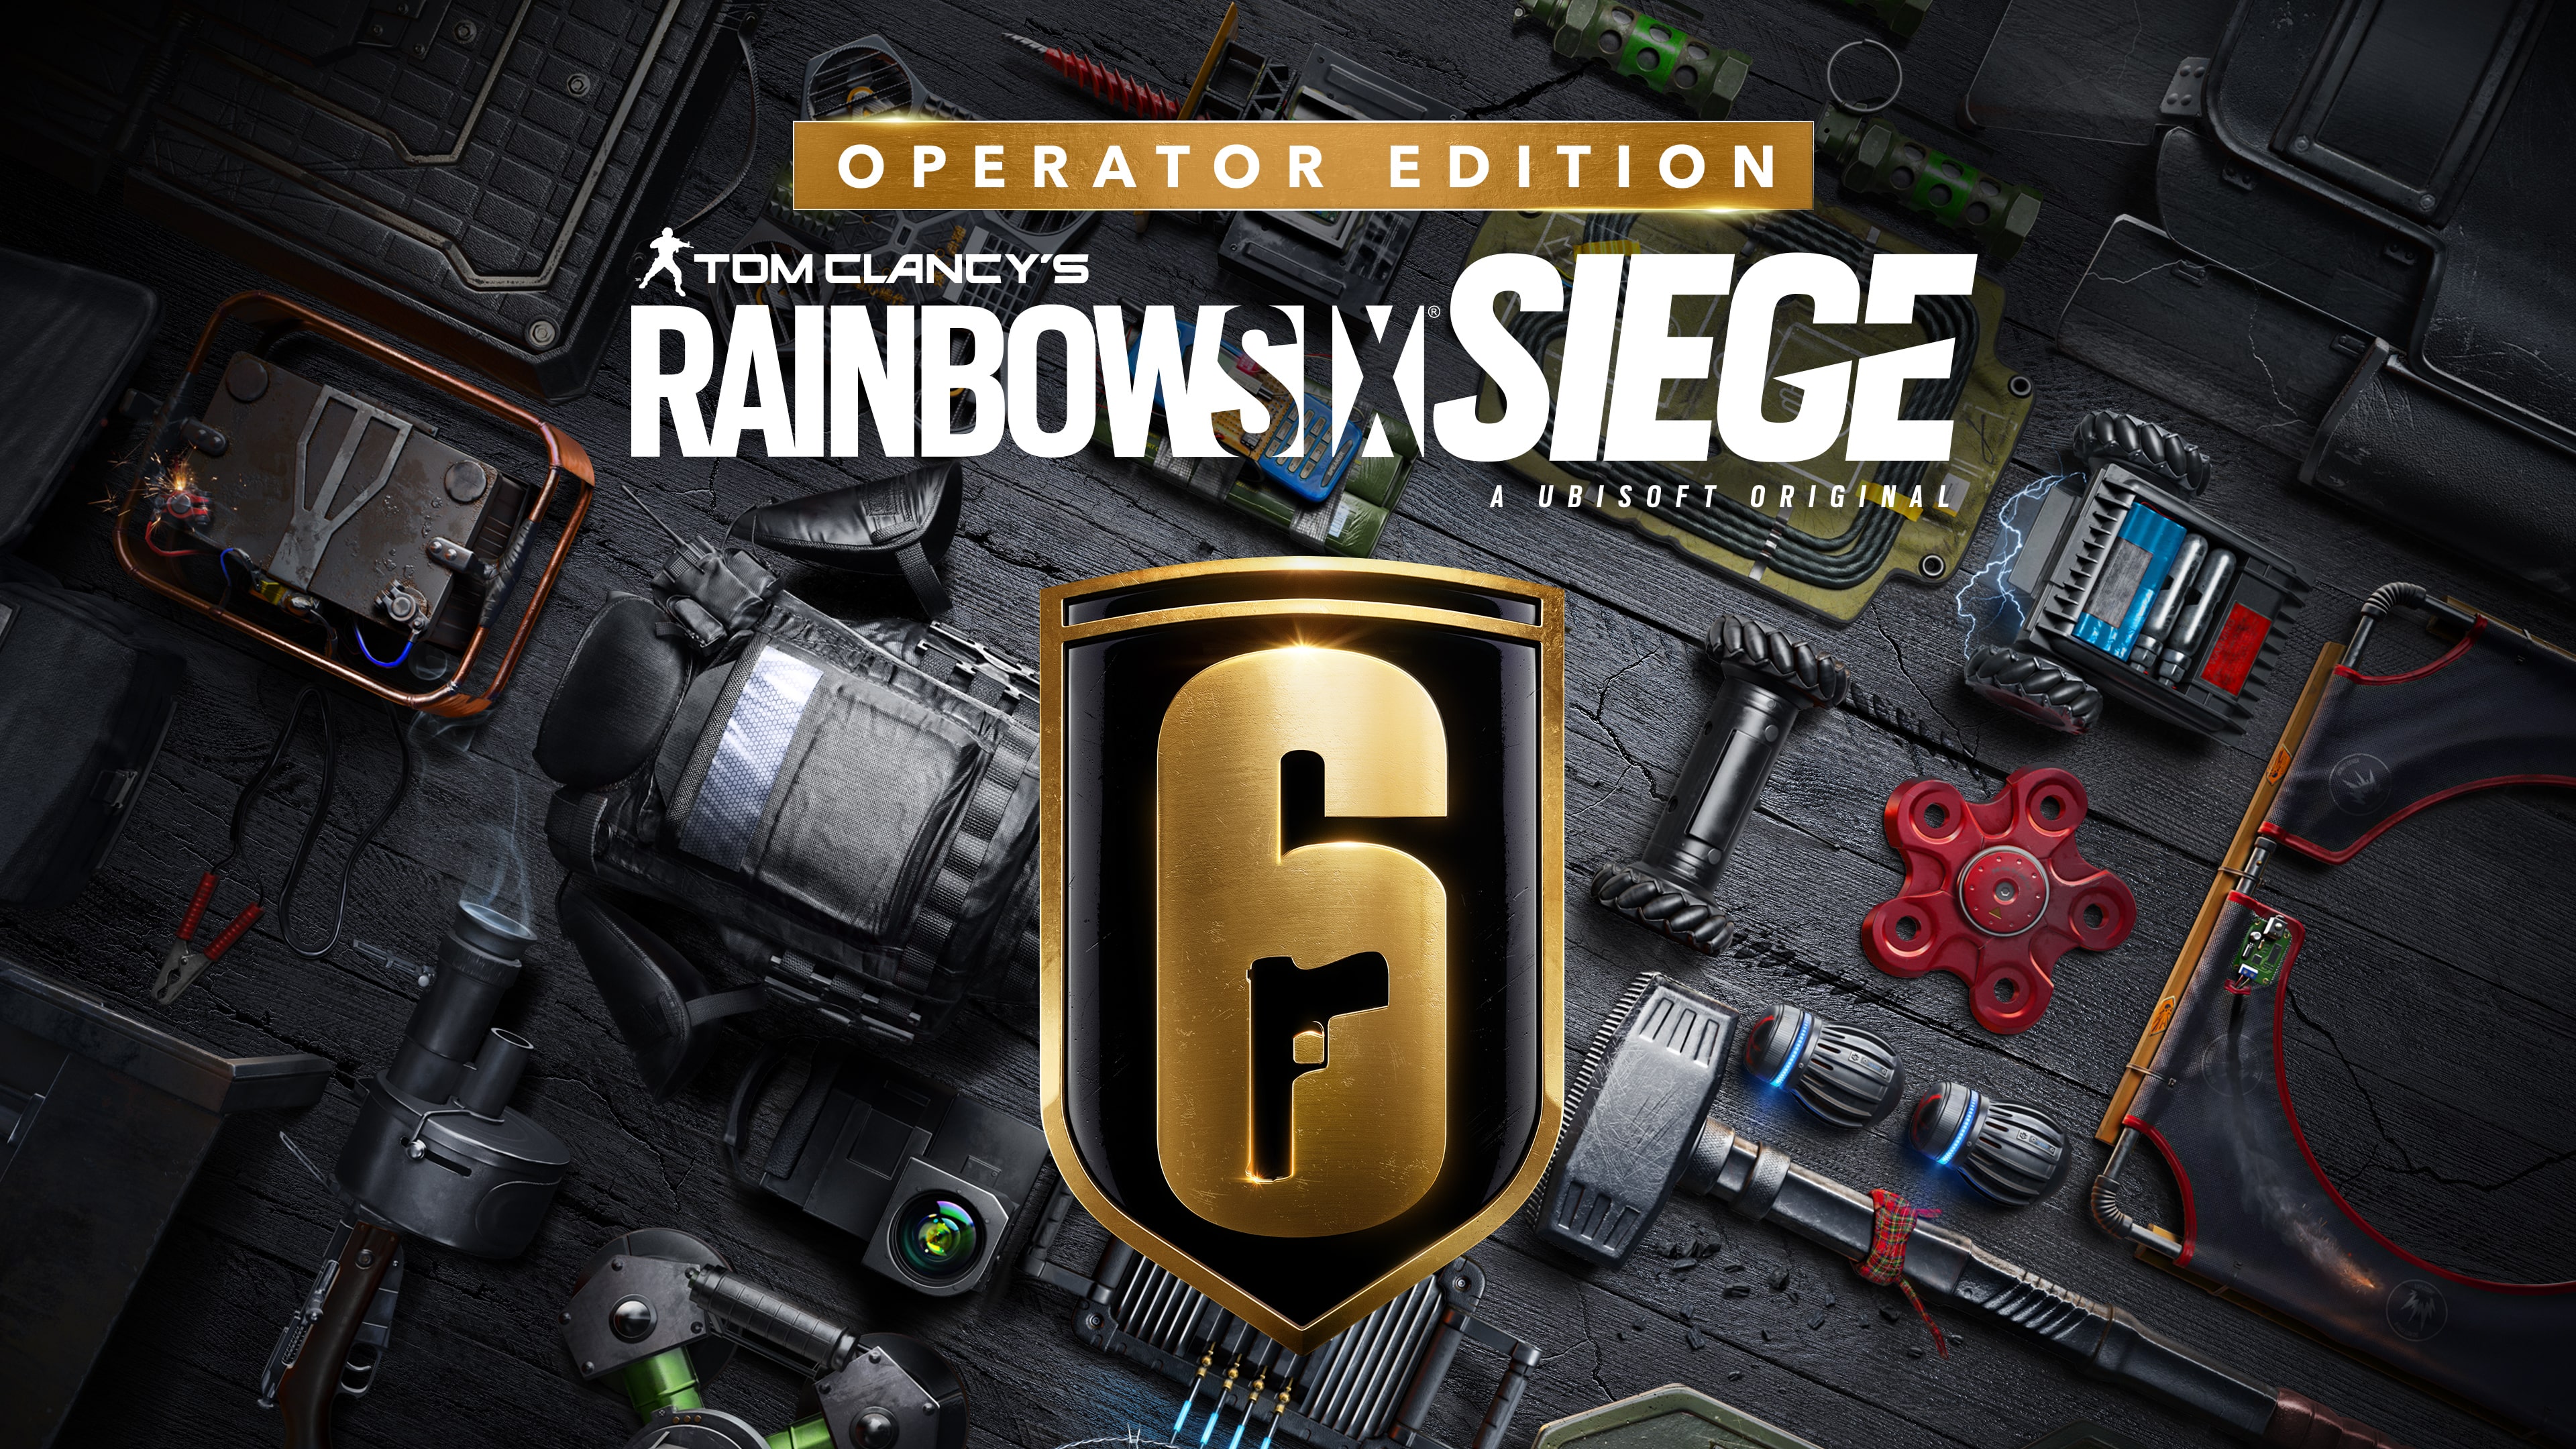 Tom Clancy's Rainbow Six® Siege Operator Edition (Simplified Chinese, English, Korean, Thai, Japanese, Traditional Chinese)